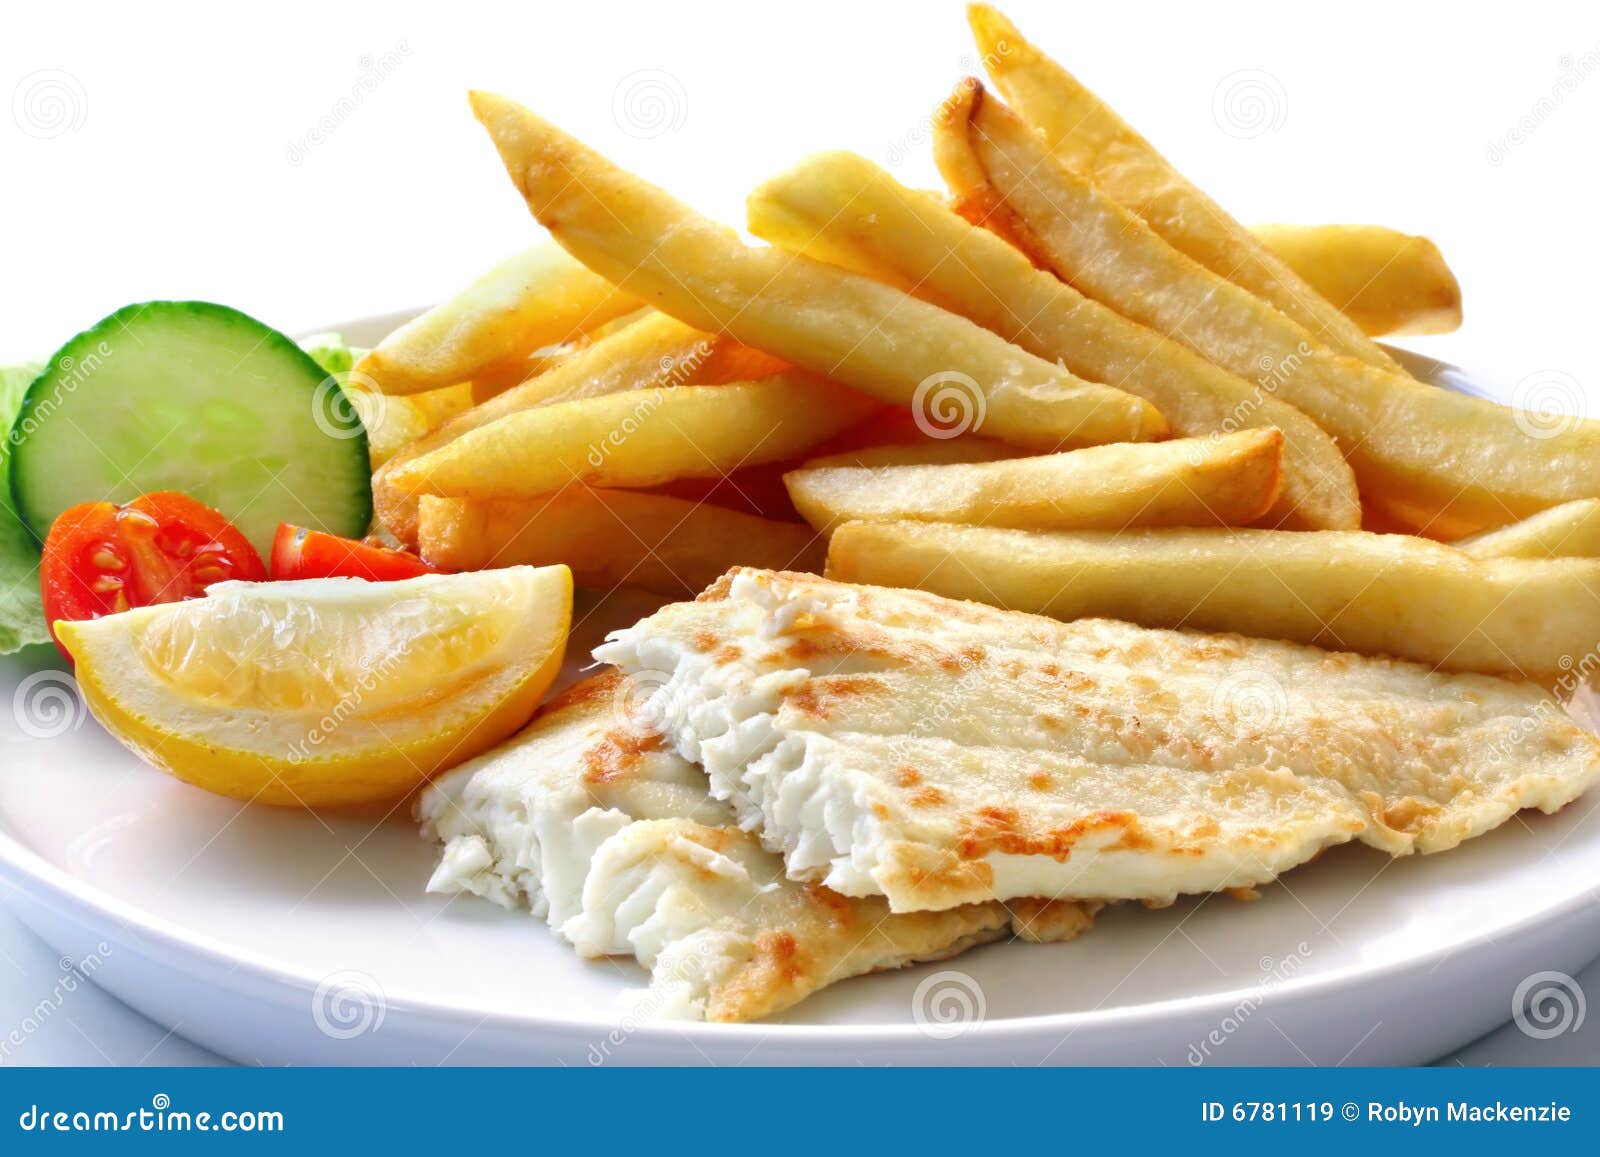 free clipart fish and chips - photo #24